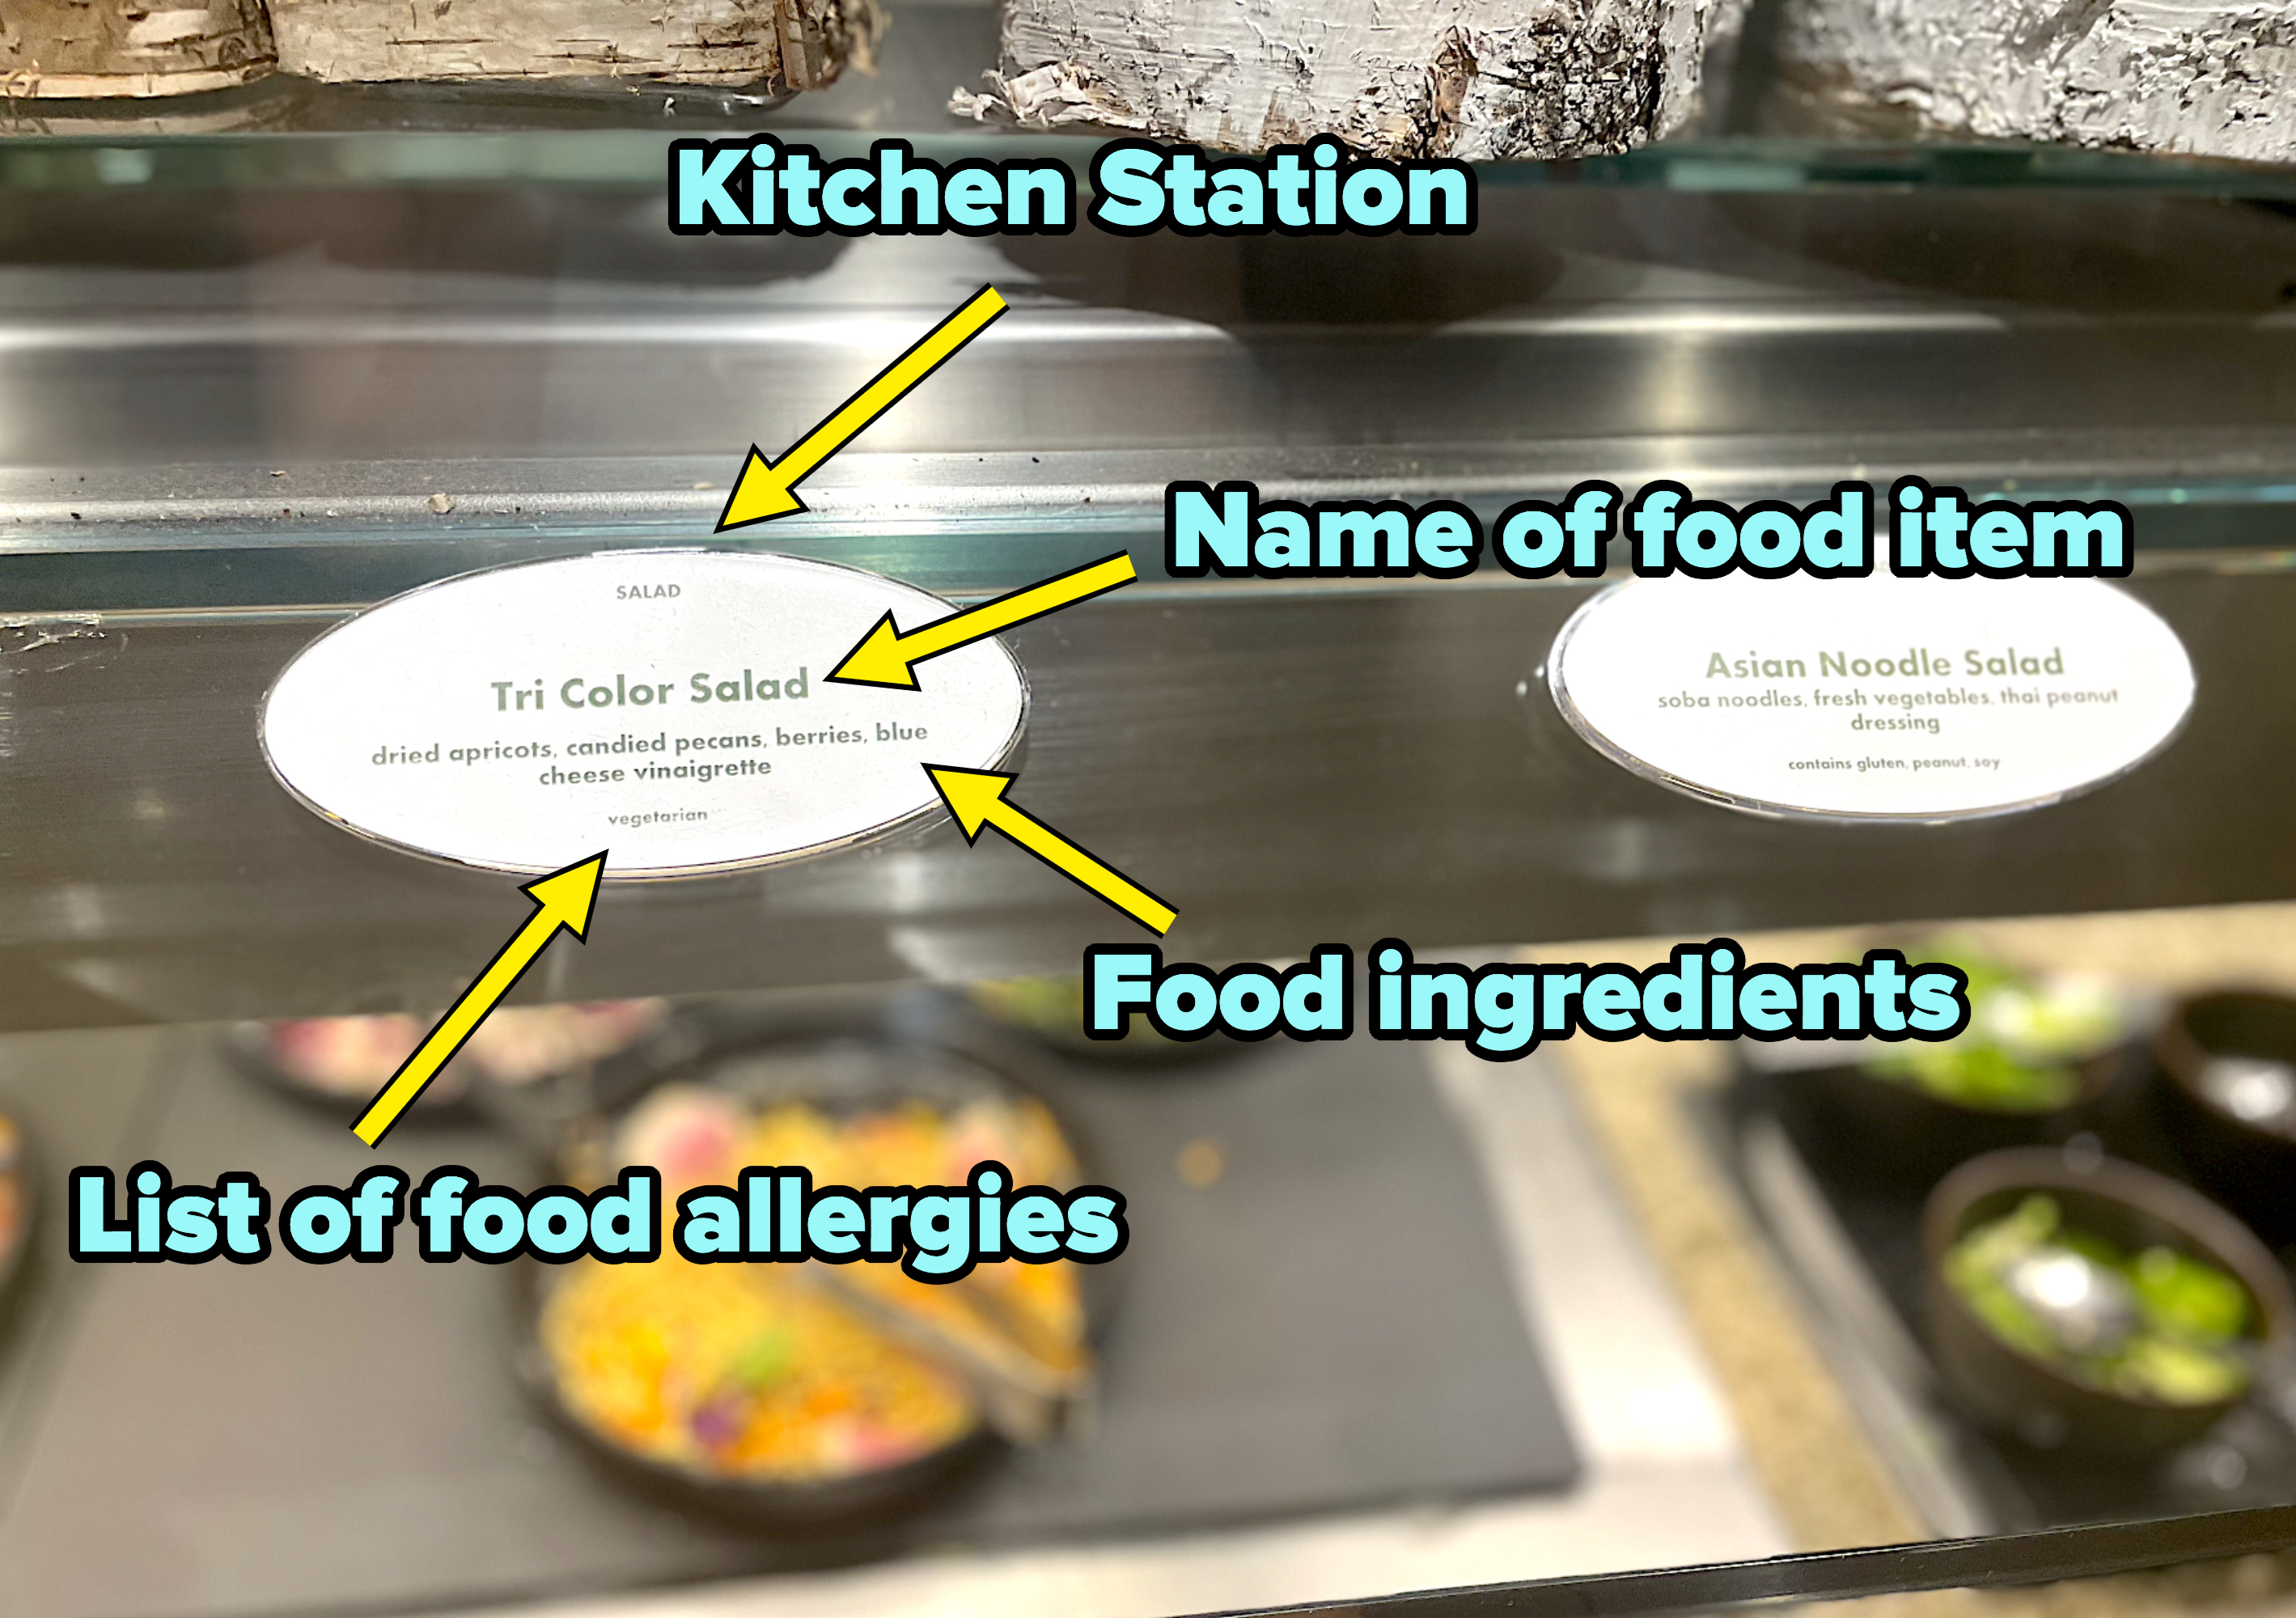 Baccahnal Buffet Food Labels, which include the kitchen station, name of the food item, the ingredients, and a list of potential allergies